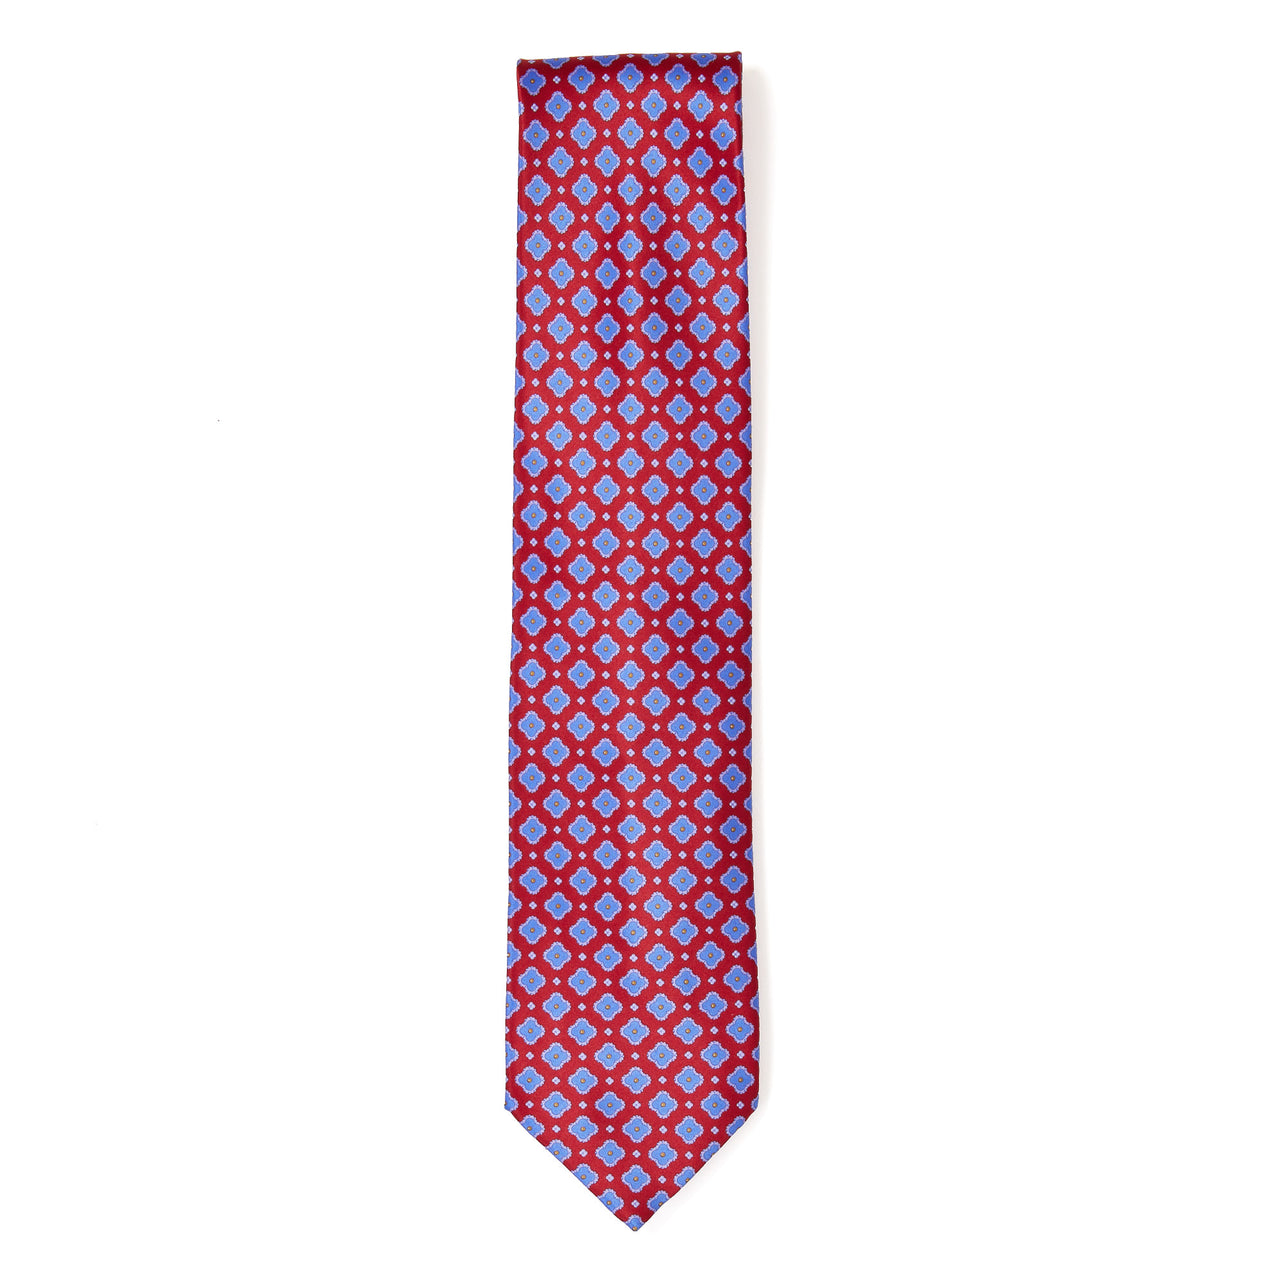 STEFANO RICCI Clover Pattern Tie RED/BLUE